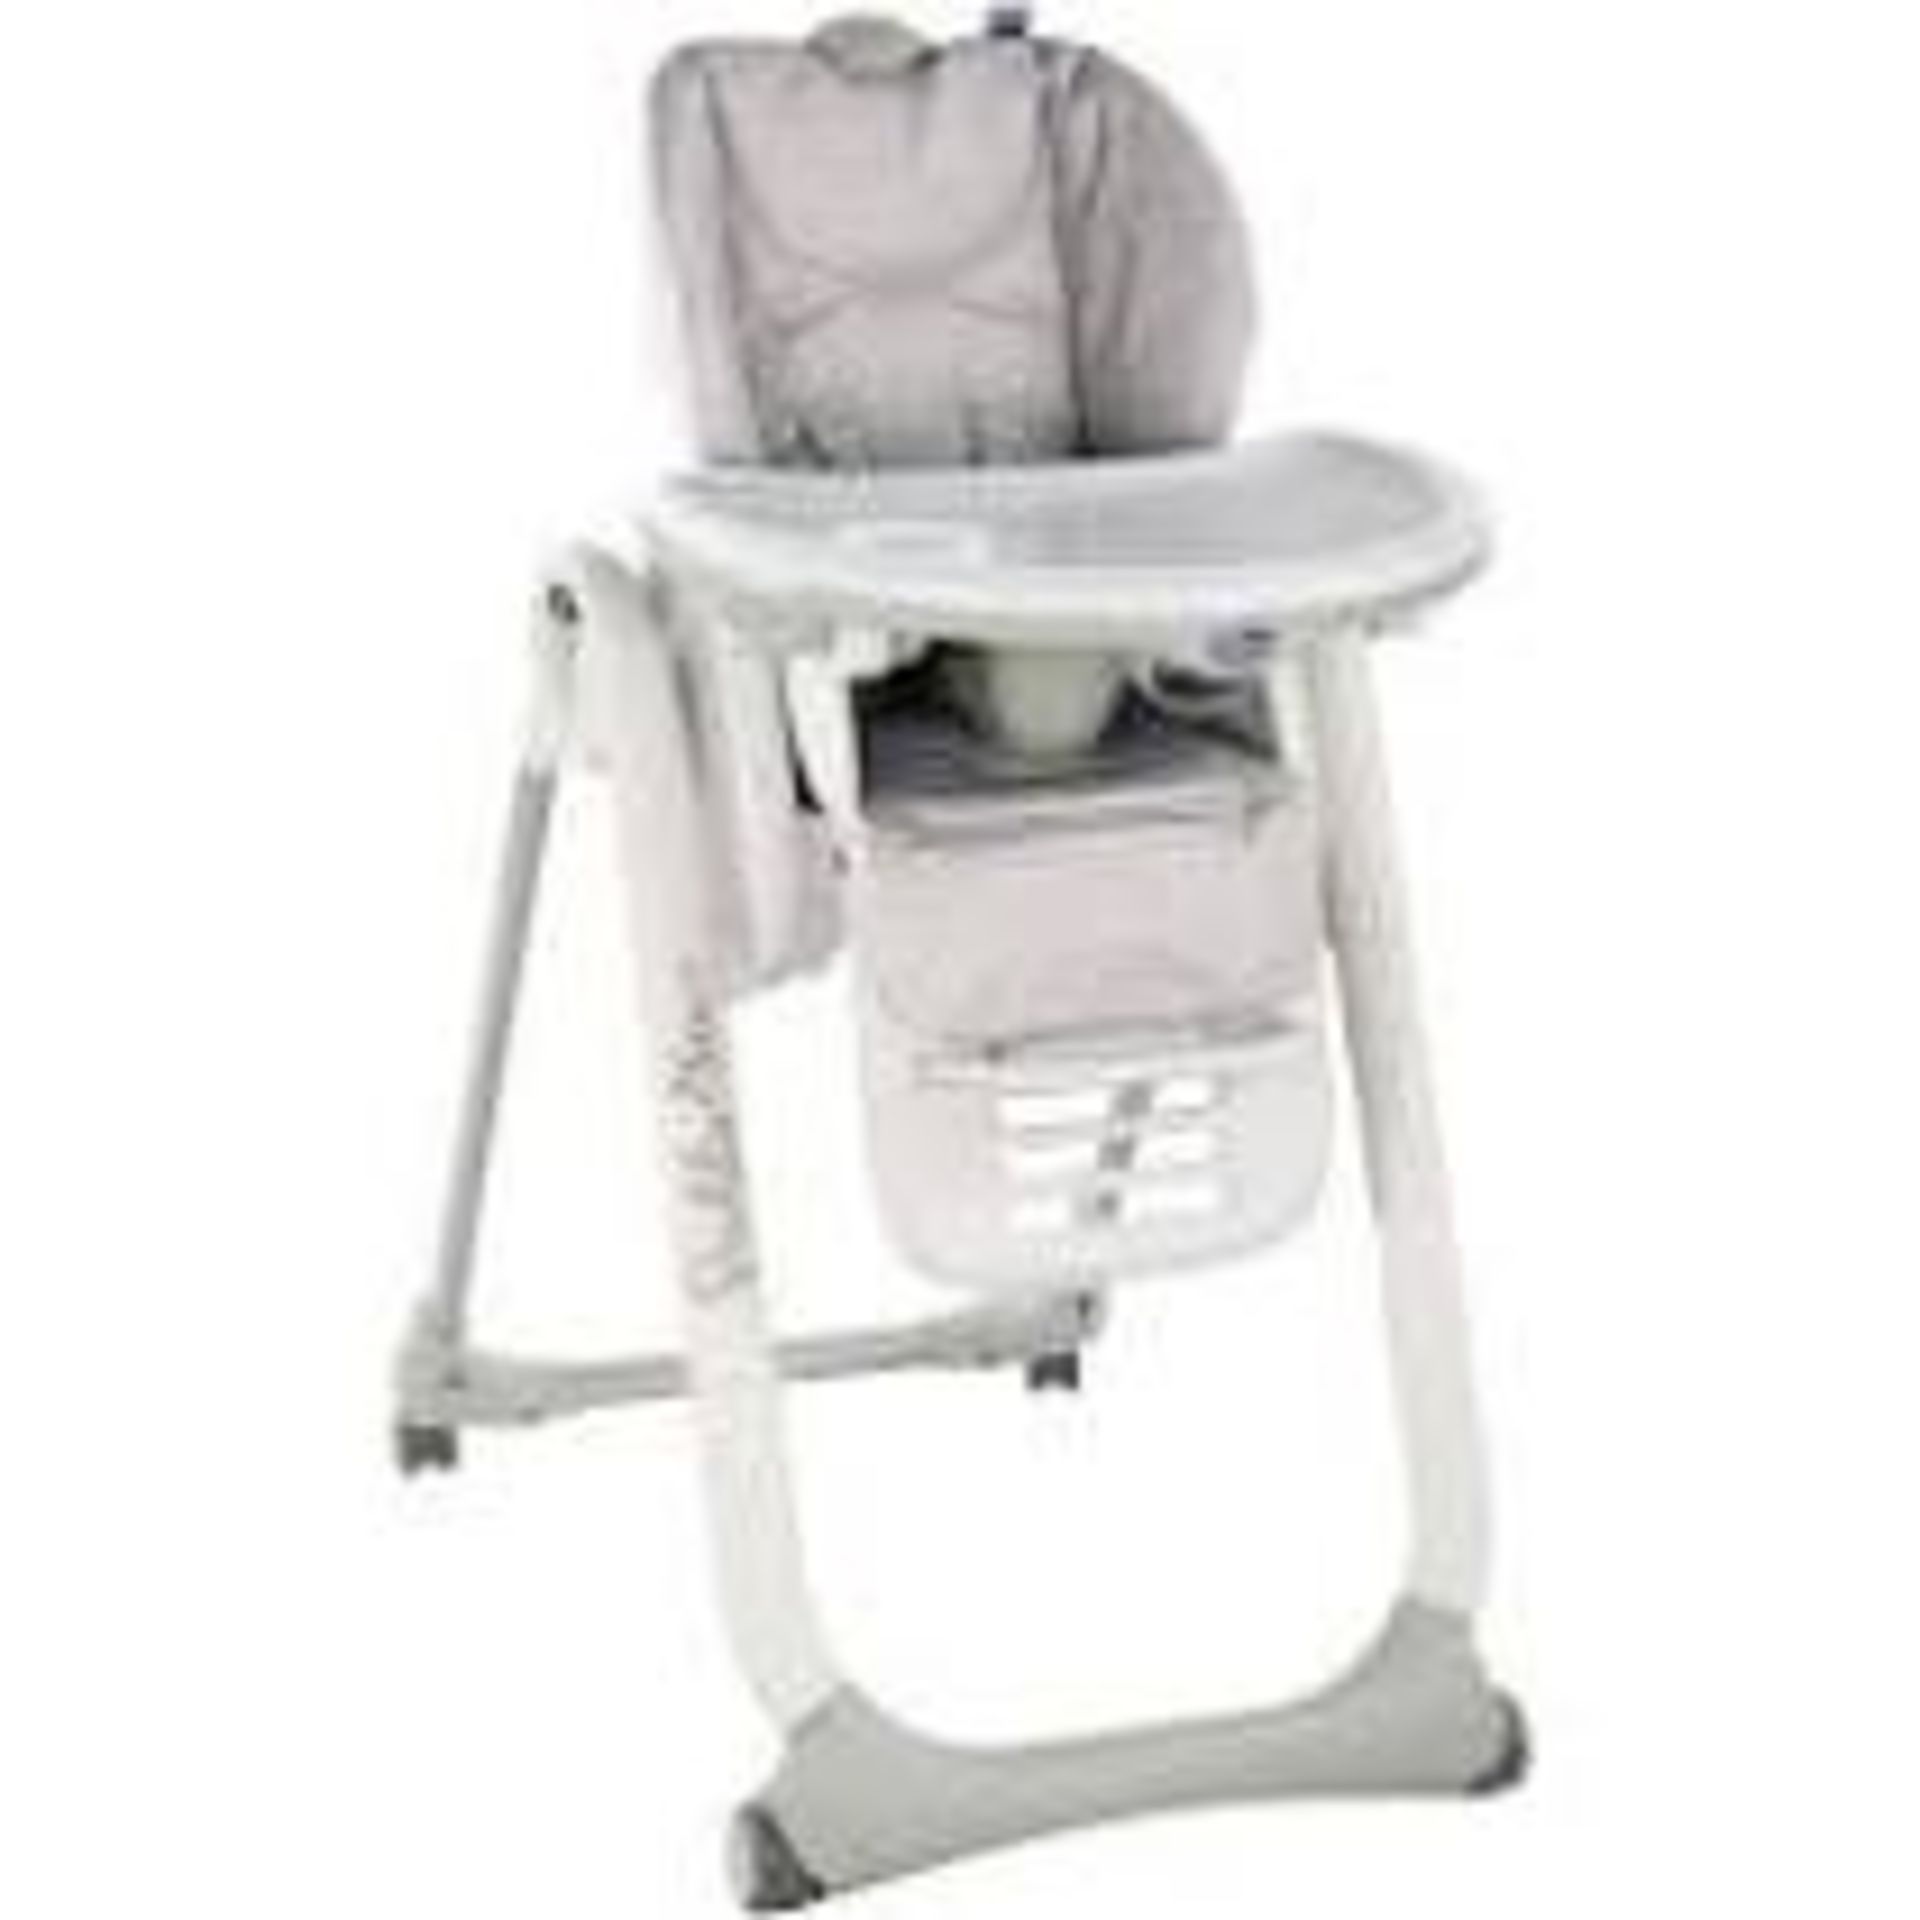 Boxed Chicco Polly 2 Start Highchair RRP £110 (691477) (Pictures For Illustration Purposes Only)(